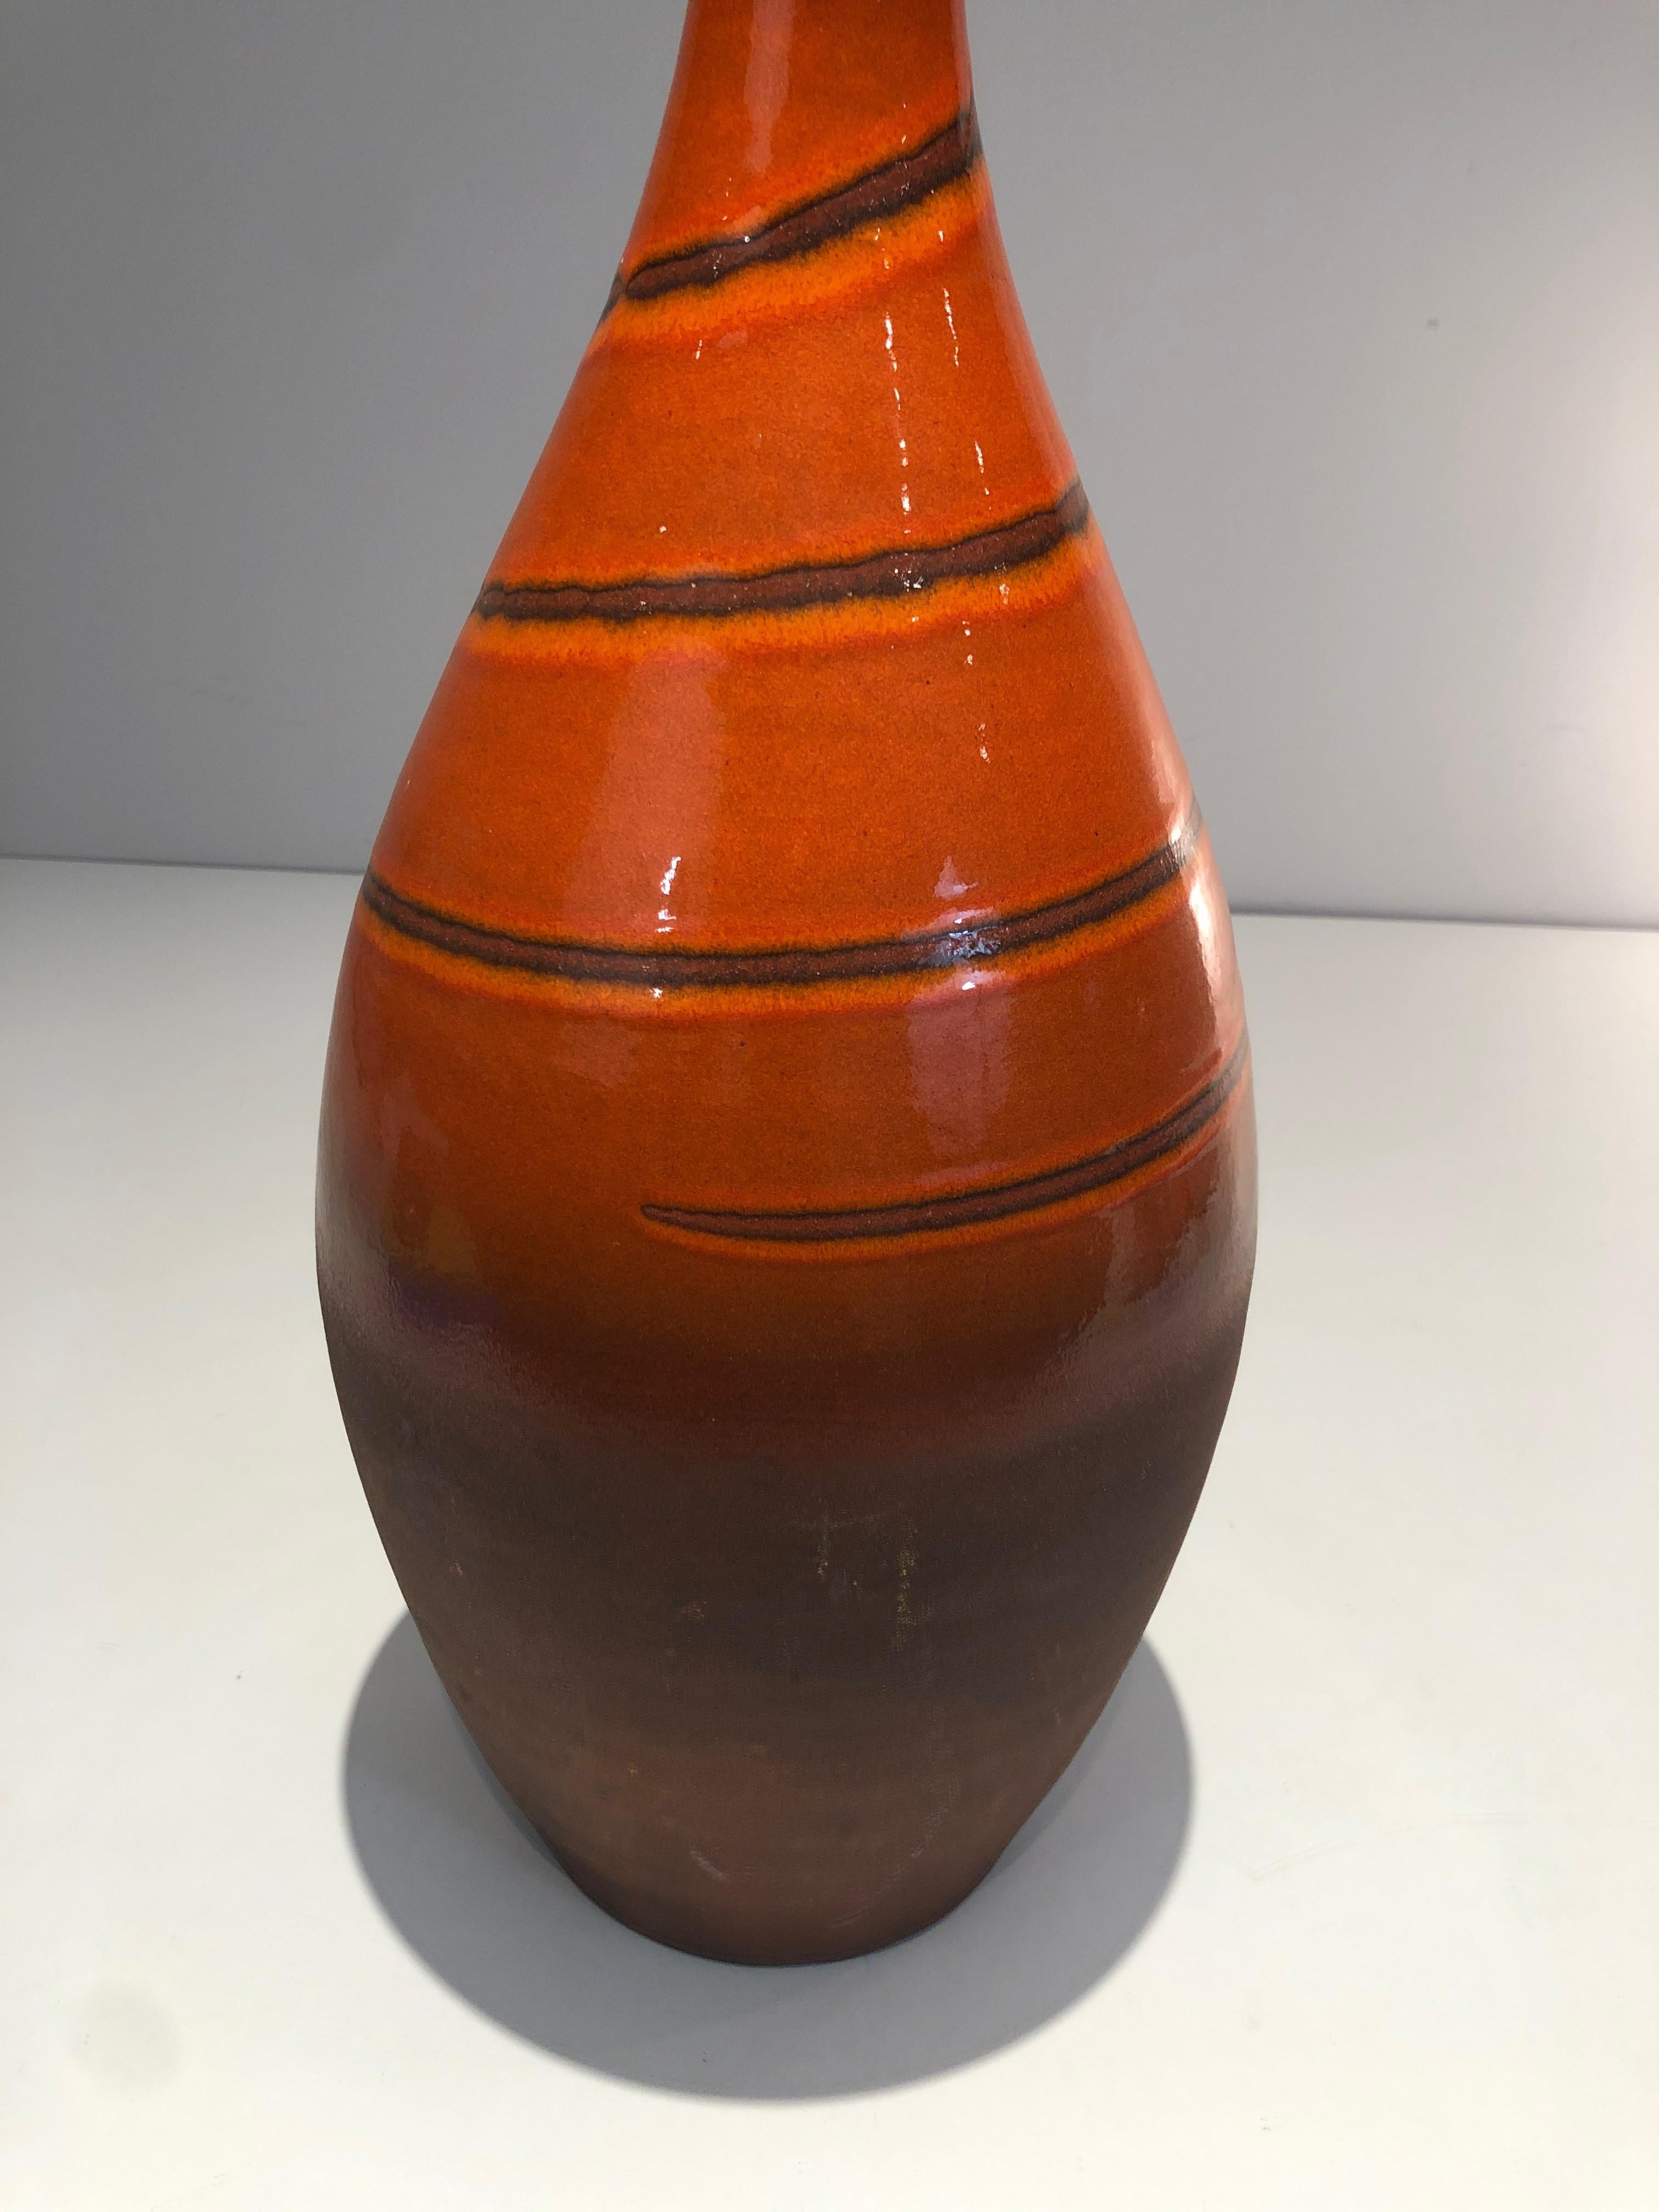 Tall Ceramic Vase in the Red-Orange Tones, French Work, Circa 1950 For Sale 2